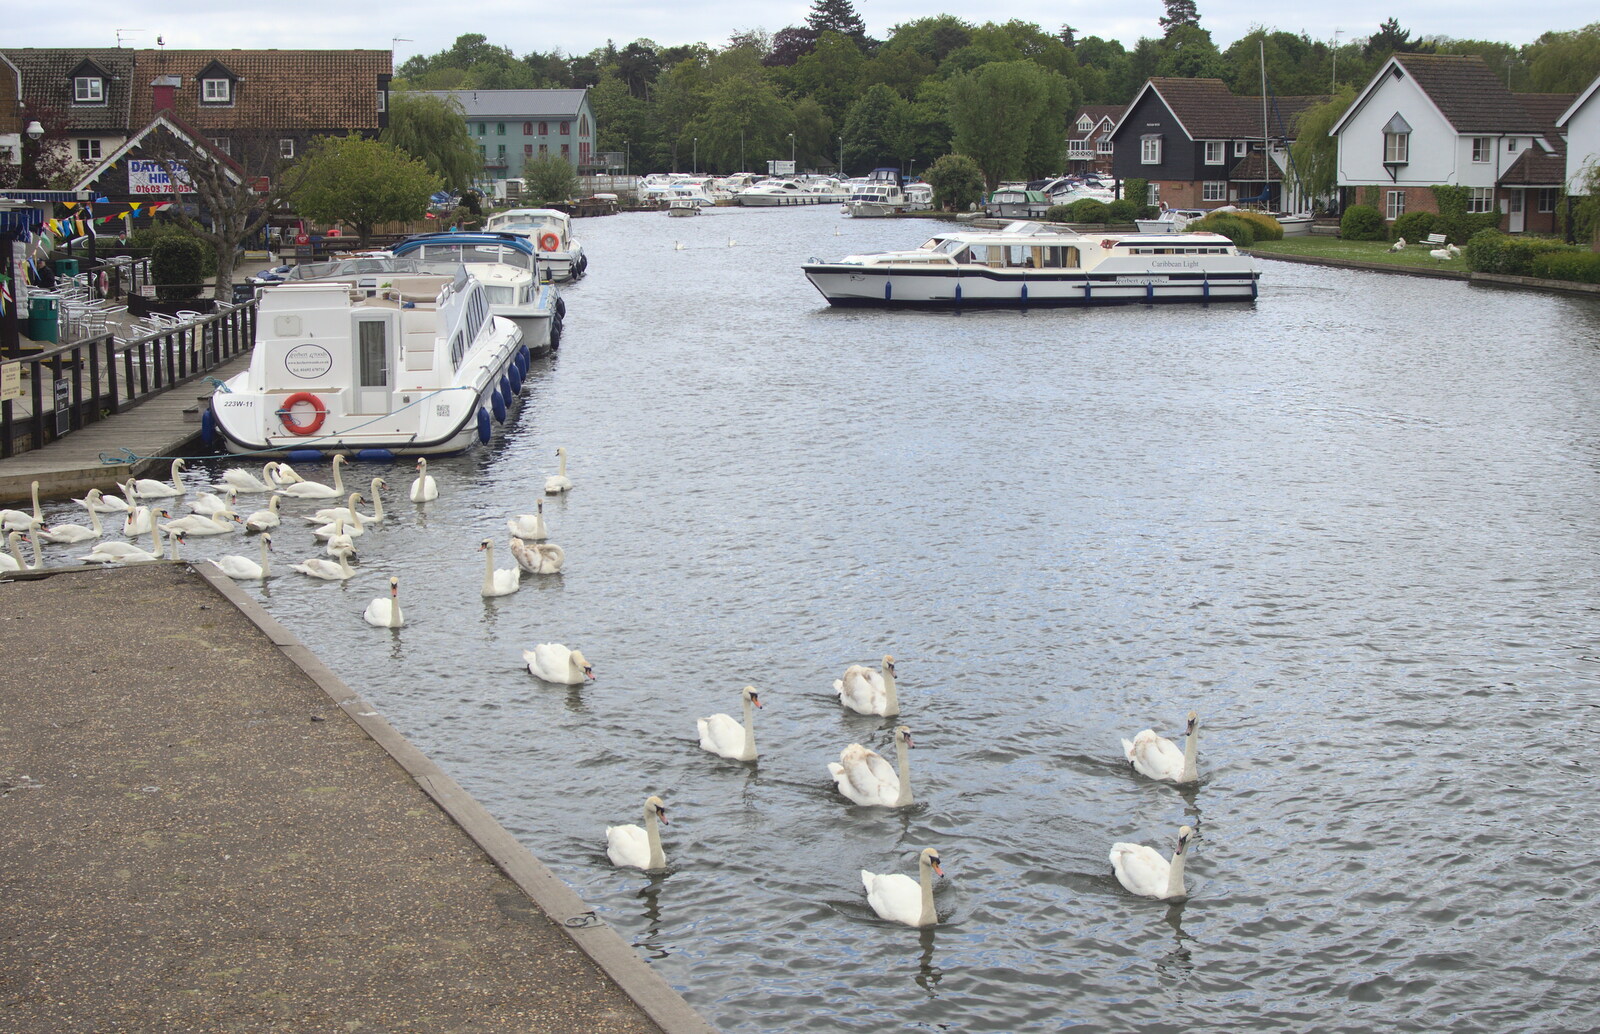 A flotilla of swans departs on a mission from A Trip on the Norfolk Broads, Wroxham, Norfolk - 25th May 2013